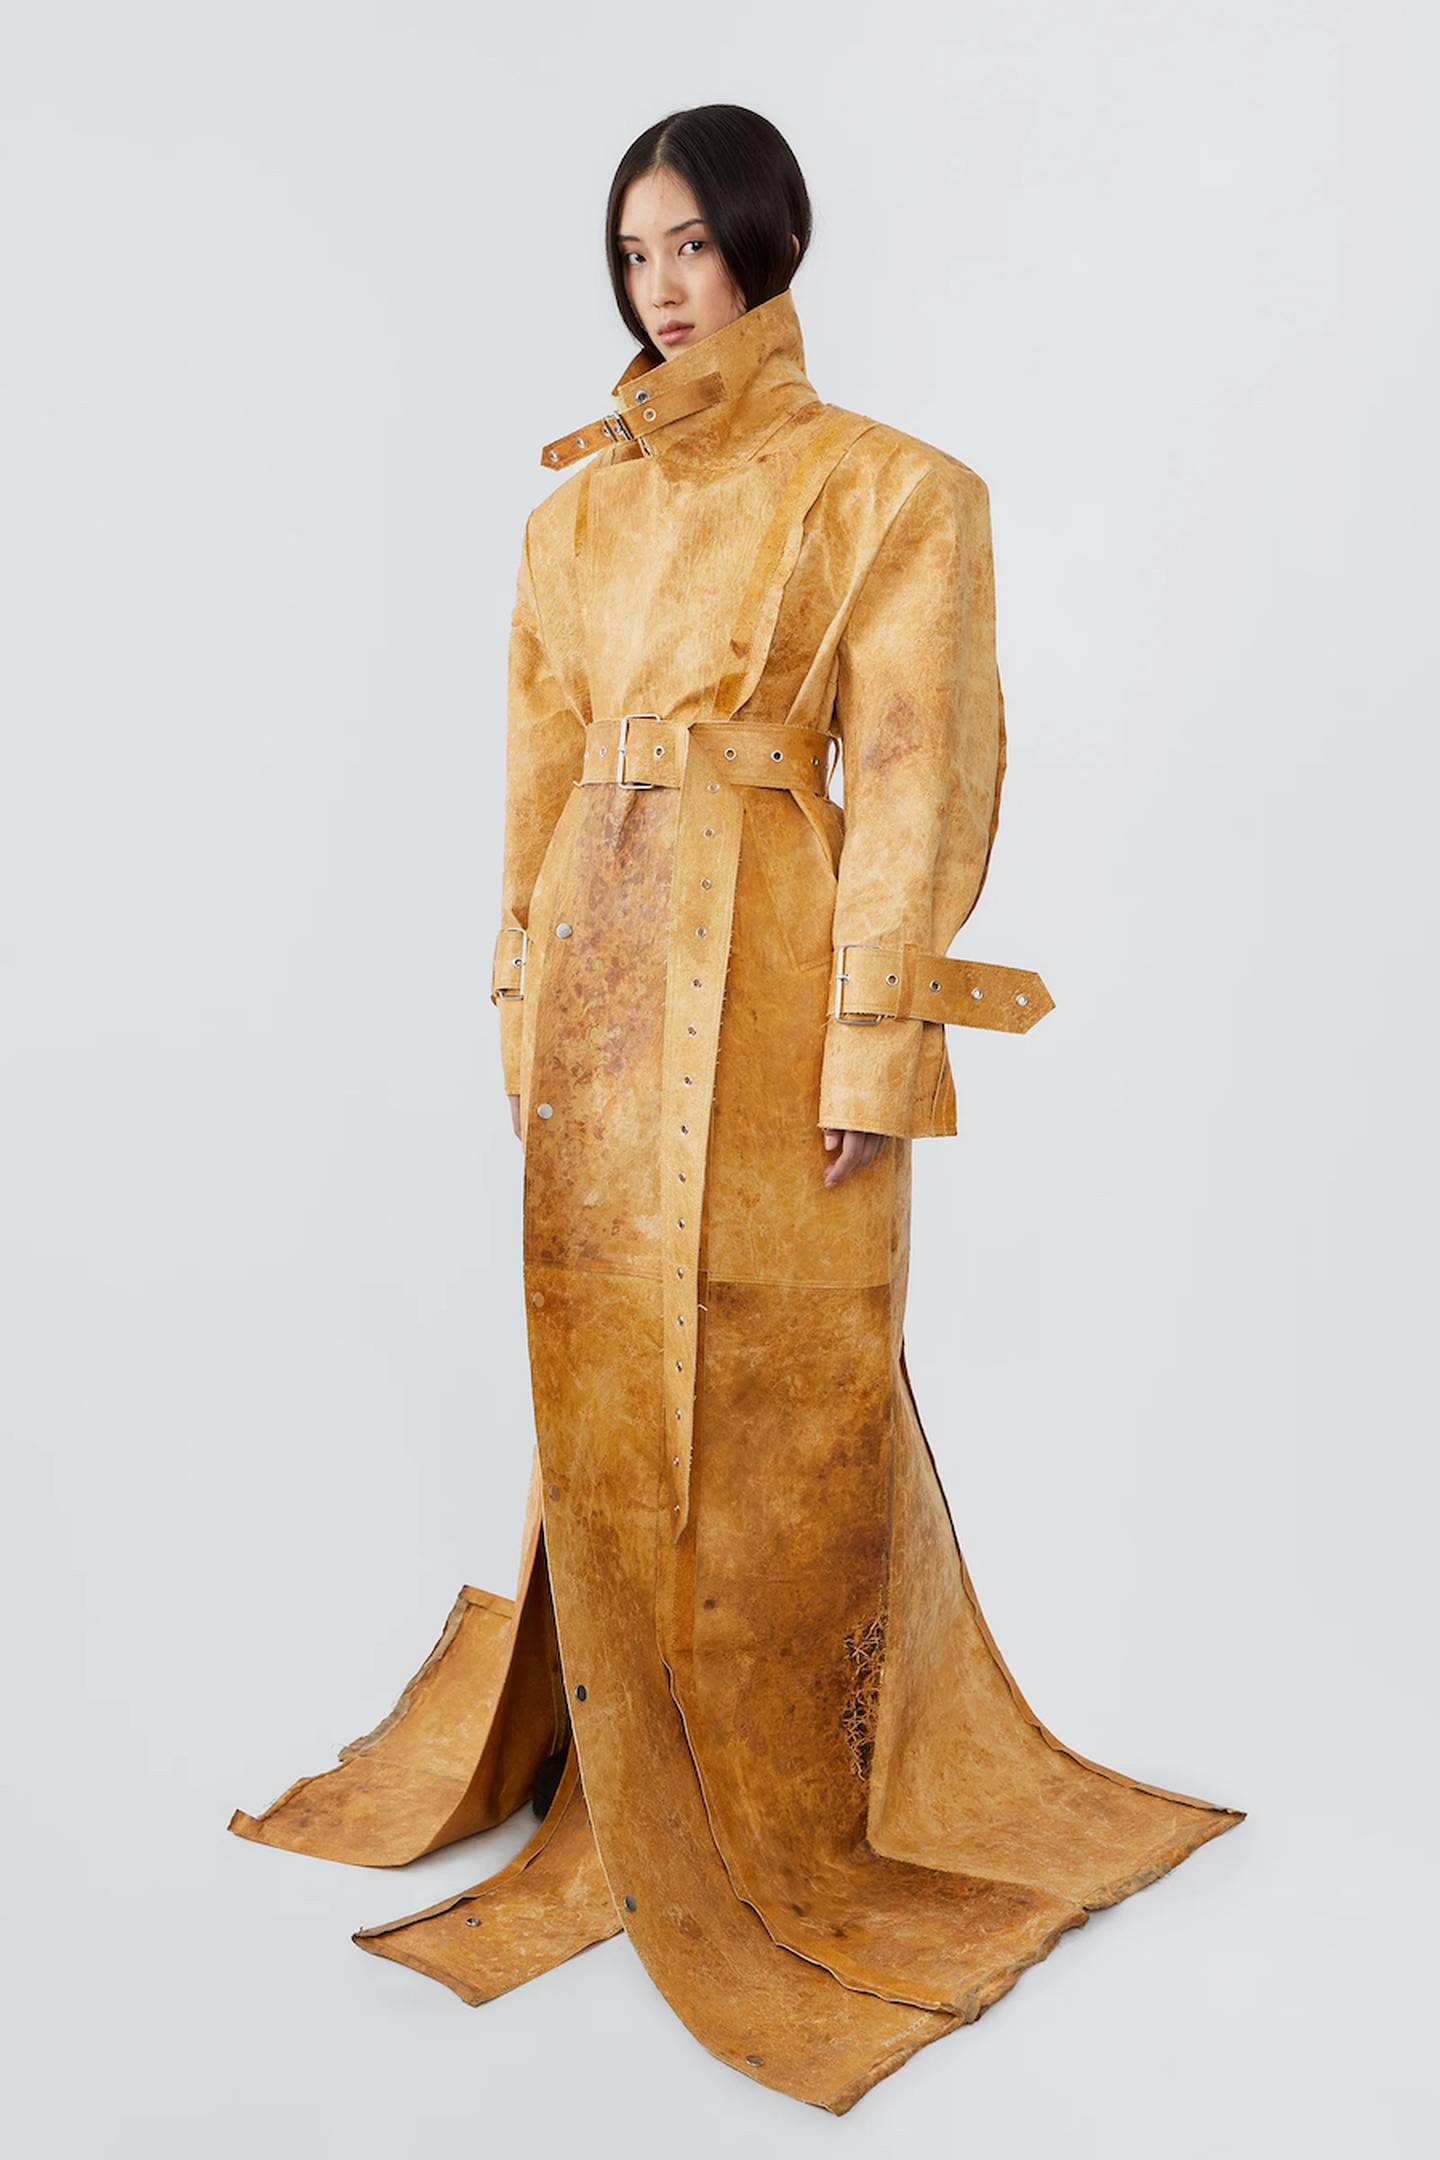 A woman glance sideways at the camera wearing a statement oversized trench coat made using MycoWorks' mycelium material as part of a capsule by Swedish brand Deadwood Studios.